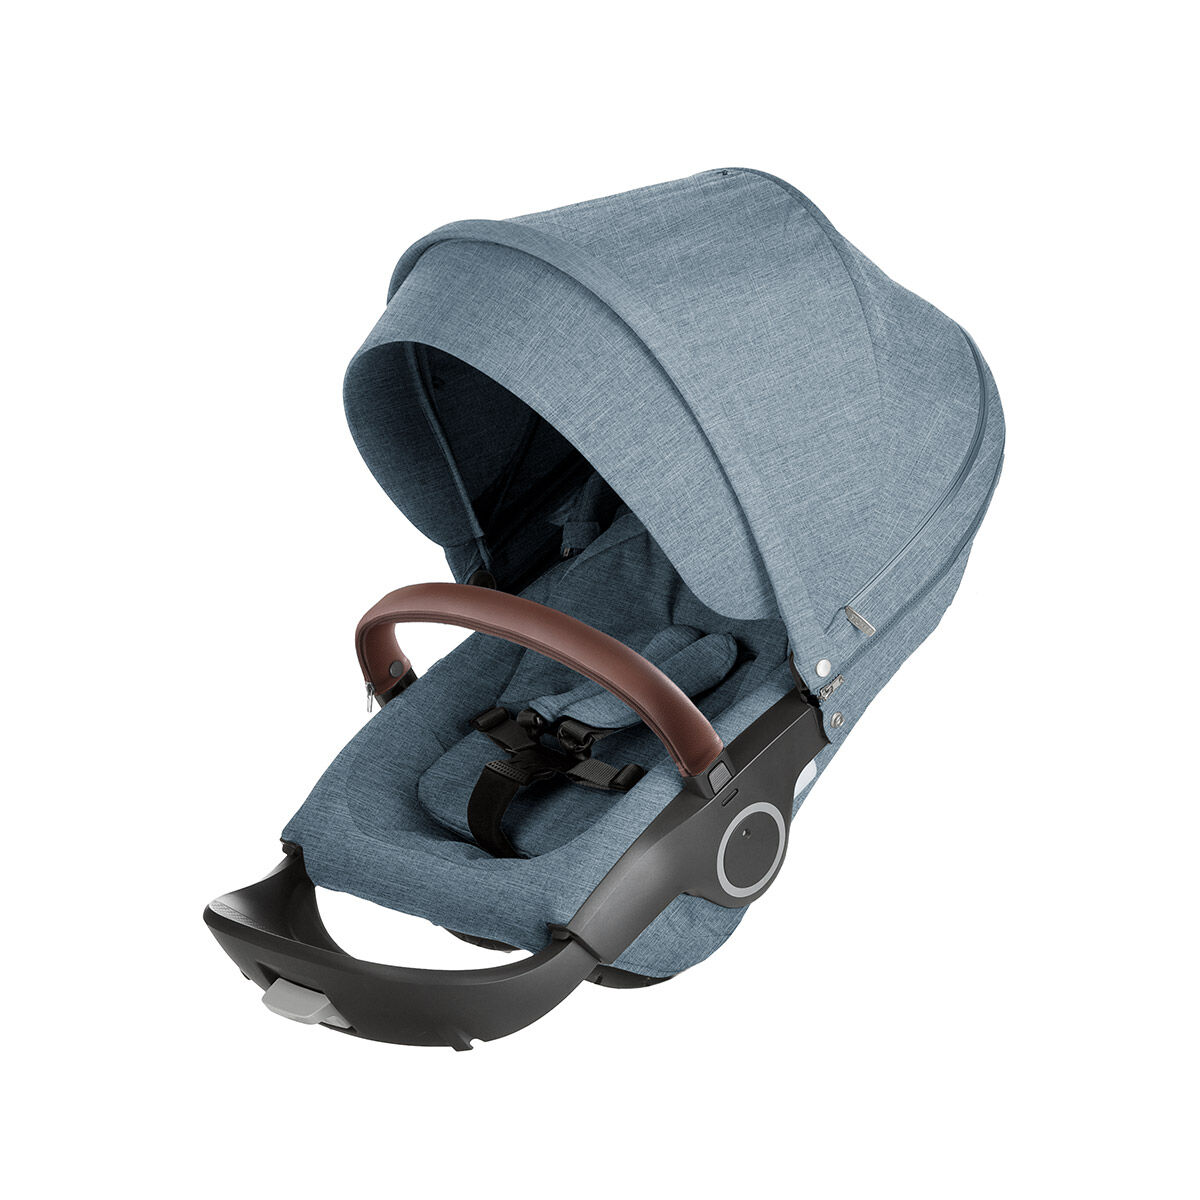 Stroller Seat Nordic Blue, Leatherette Handle Brown